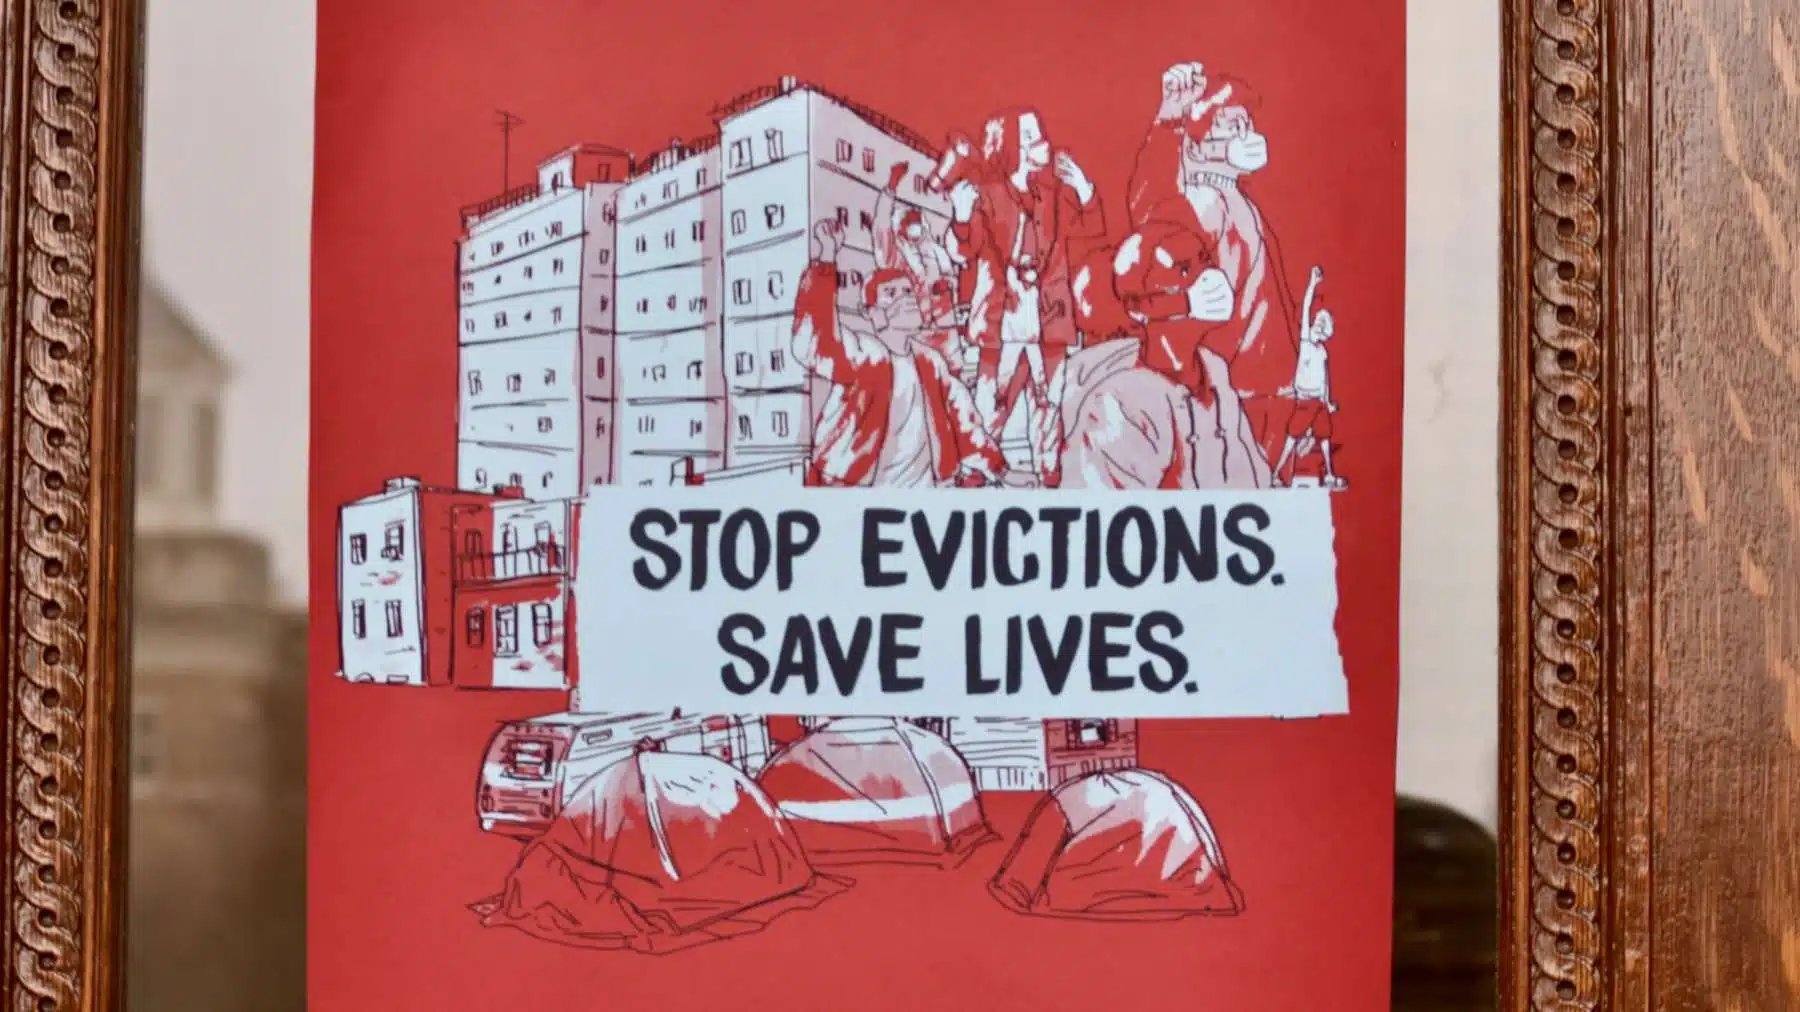 CDC Eviction Moratorium extended to June 30, but landlords are exploiting loopholes